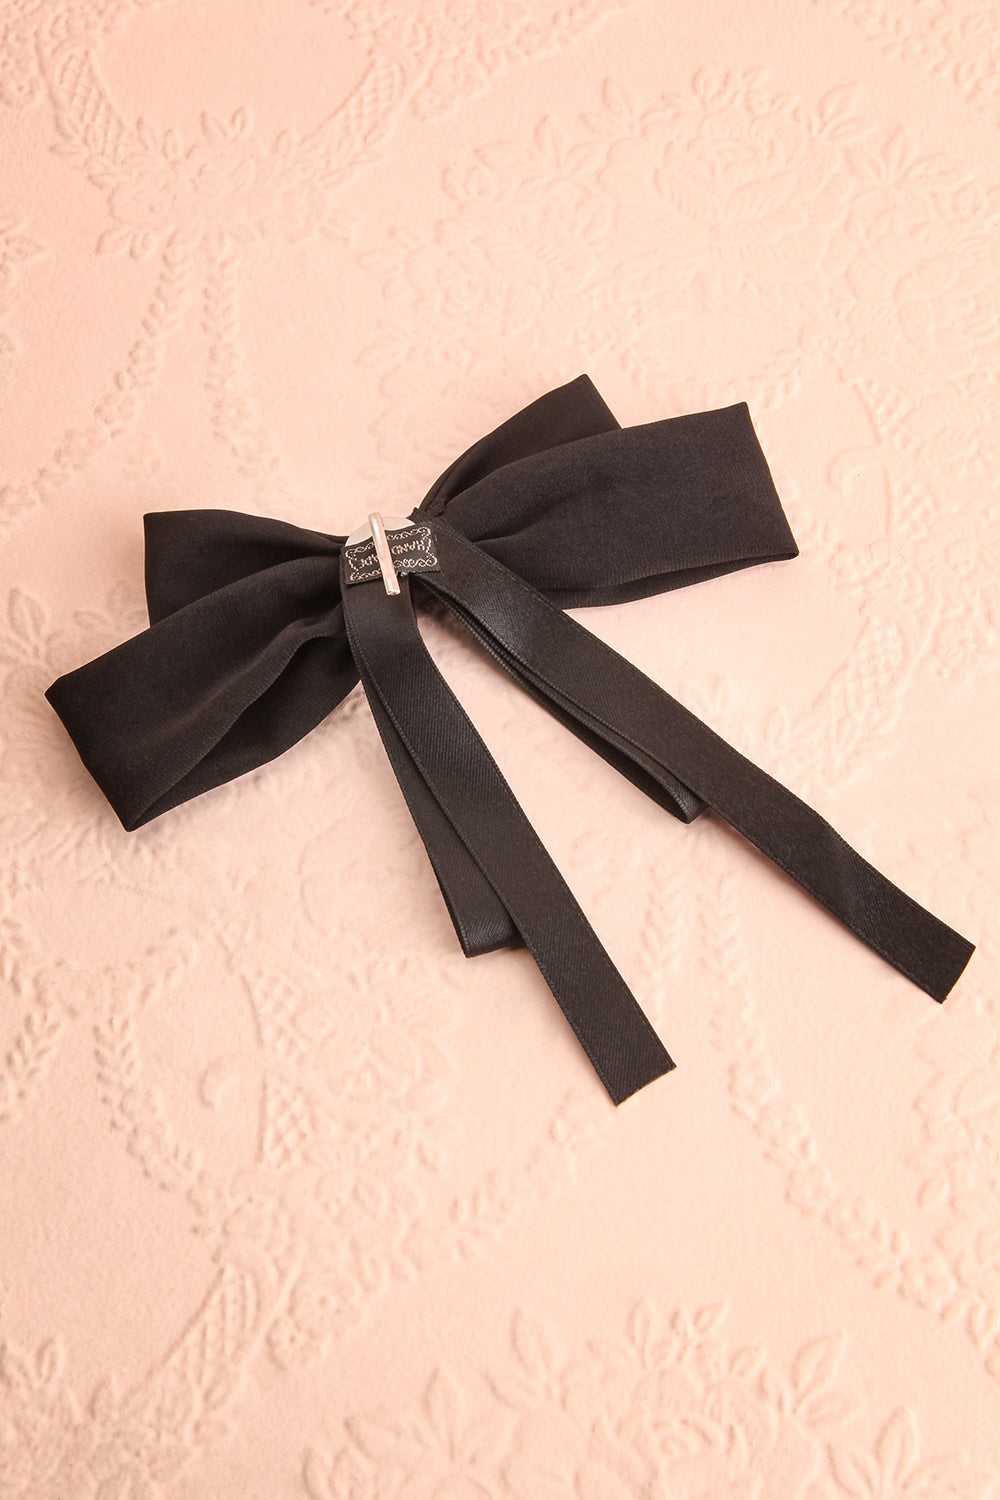 Rhena Black Ponytail Hook Hair Bow | Boutique 1861 back view